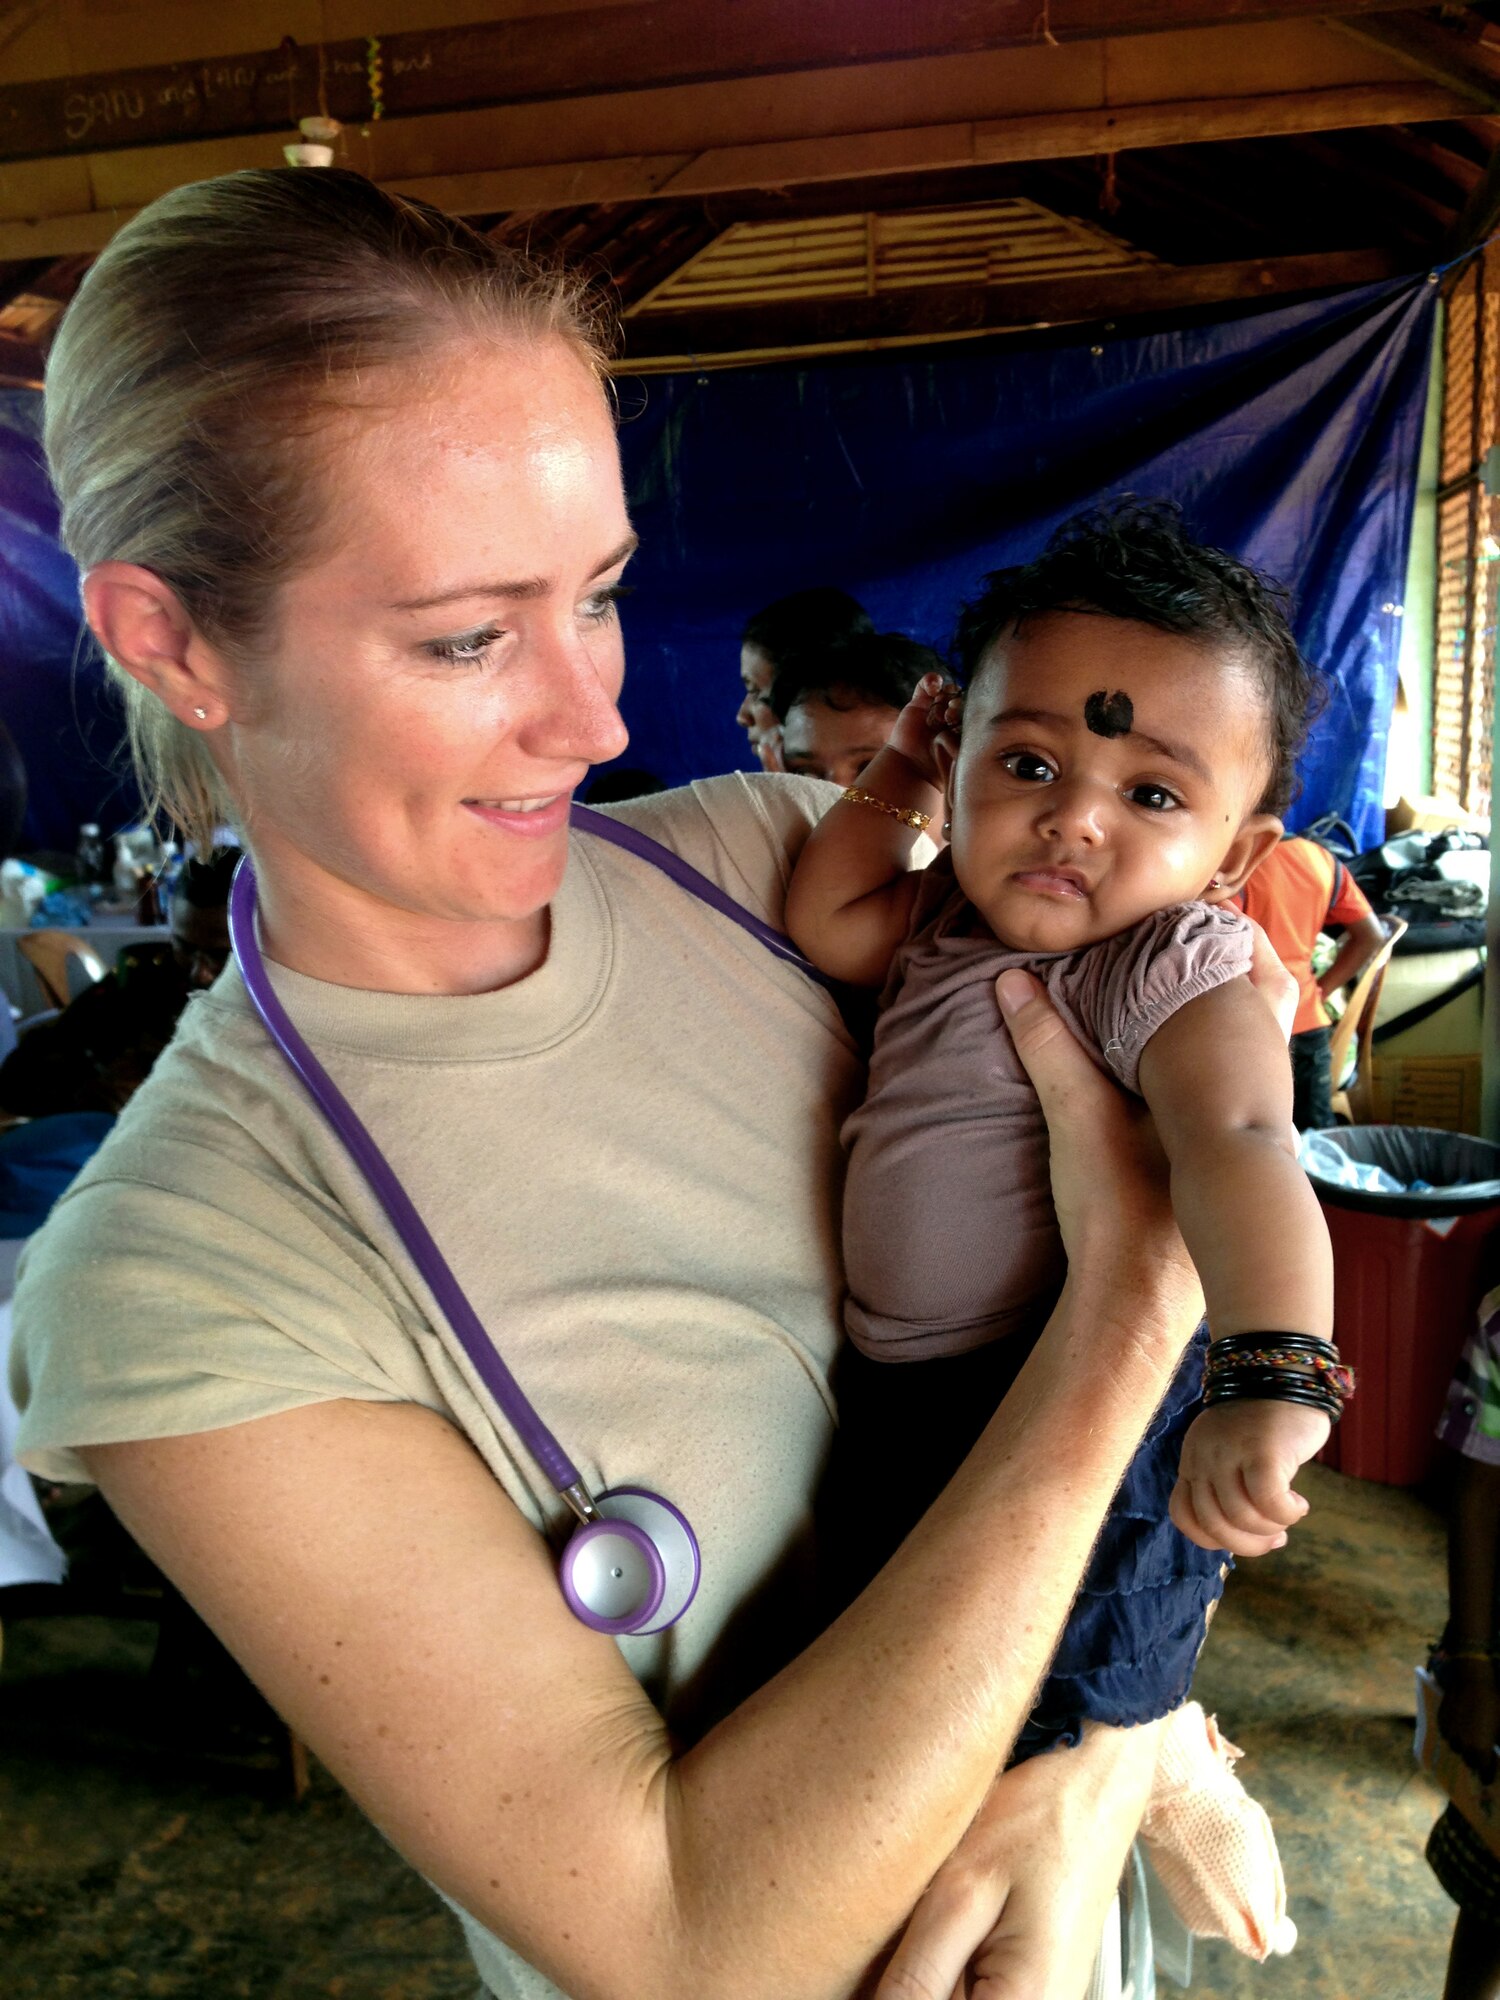 Air Force Tech. Sgt. Misty Ray, 142nd Fighter Wing Medical Group, hold a child to be examined during the Pacific Angel Mission in the Jaffna Peninsula of Sri Lanka, July 28- Aug.18. (Photo courtesy of Tech. Sgt. Misty Ray, 142nd Fighter Wing Medical Group).